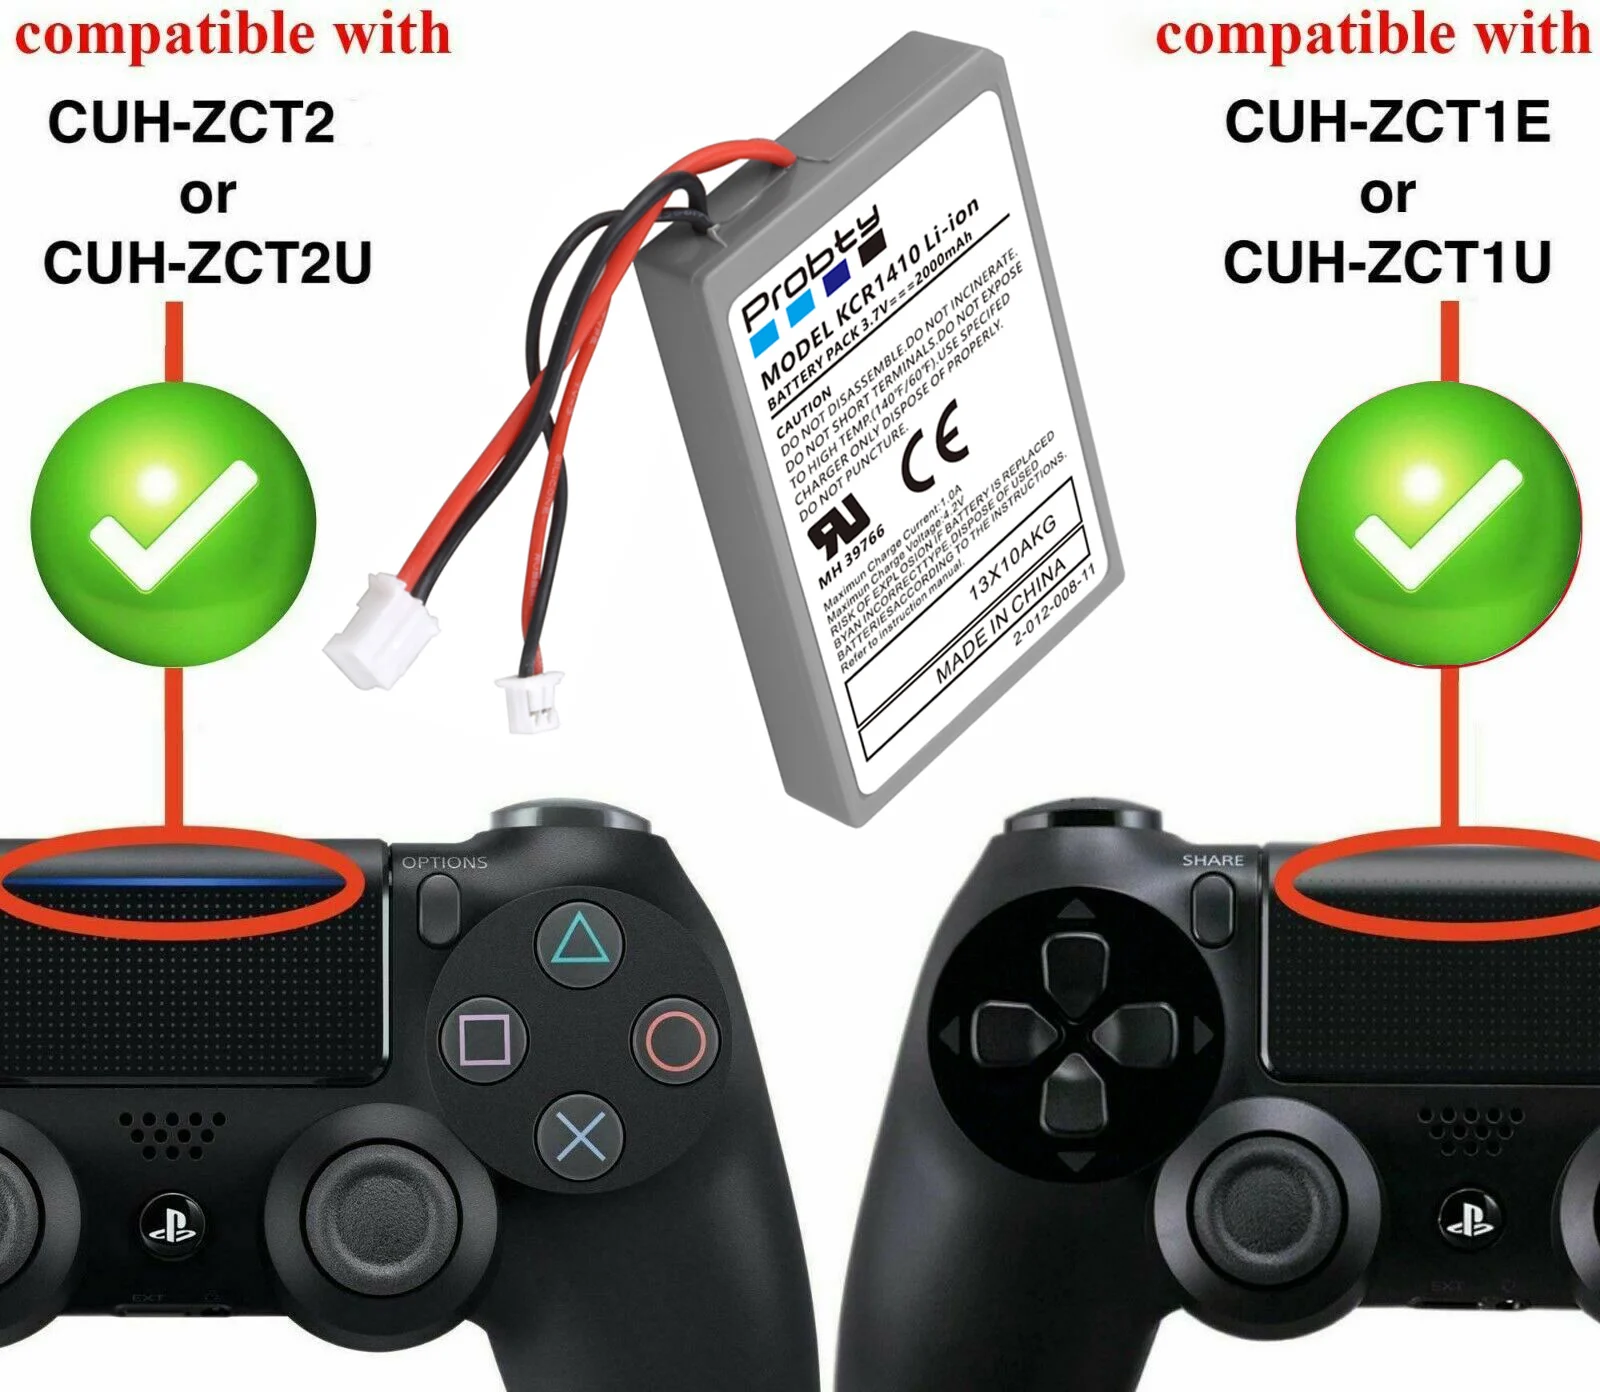 10 Pcs Replacement Battery for Sony PS4 PS4Pro Controller Playstation 4 V4 V1 V2 DualShock CUH-ZCT2, CUH-ZCT2E, CUH-ZCT1E images - 6